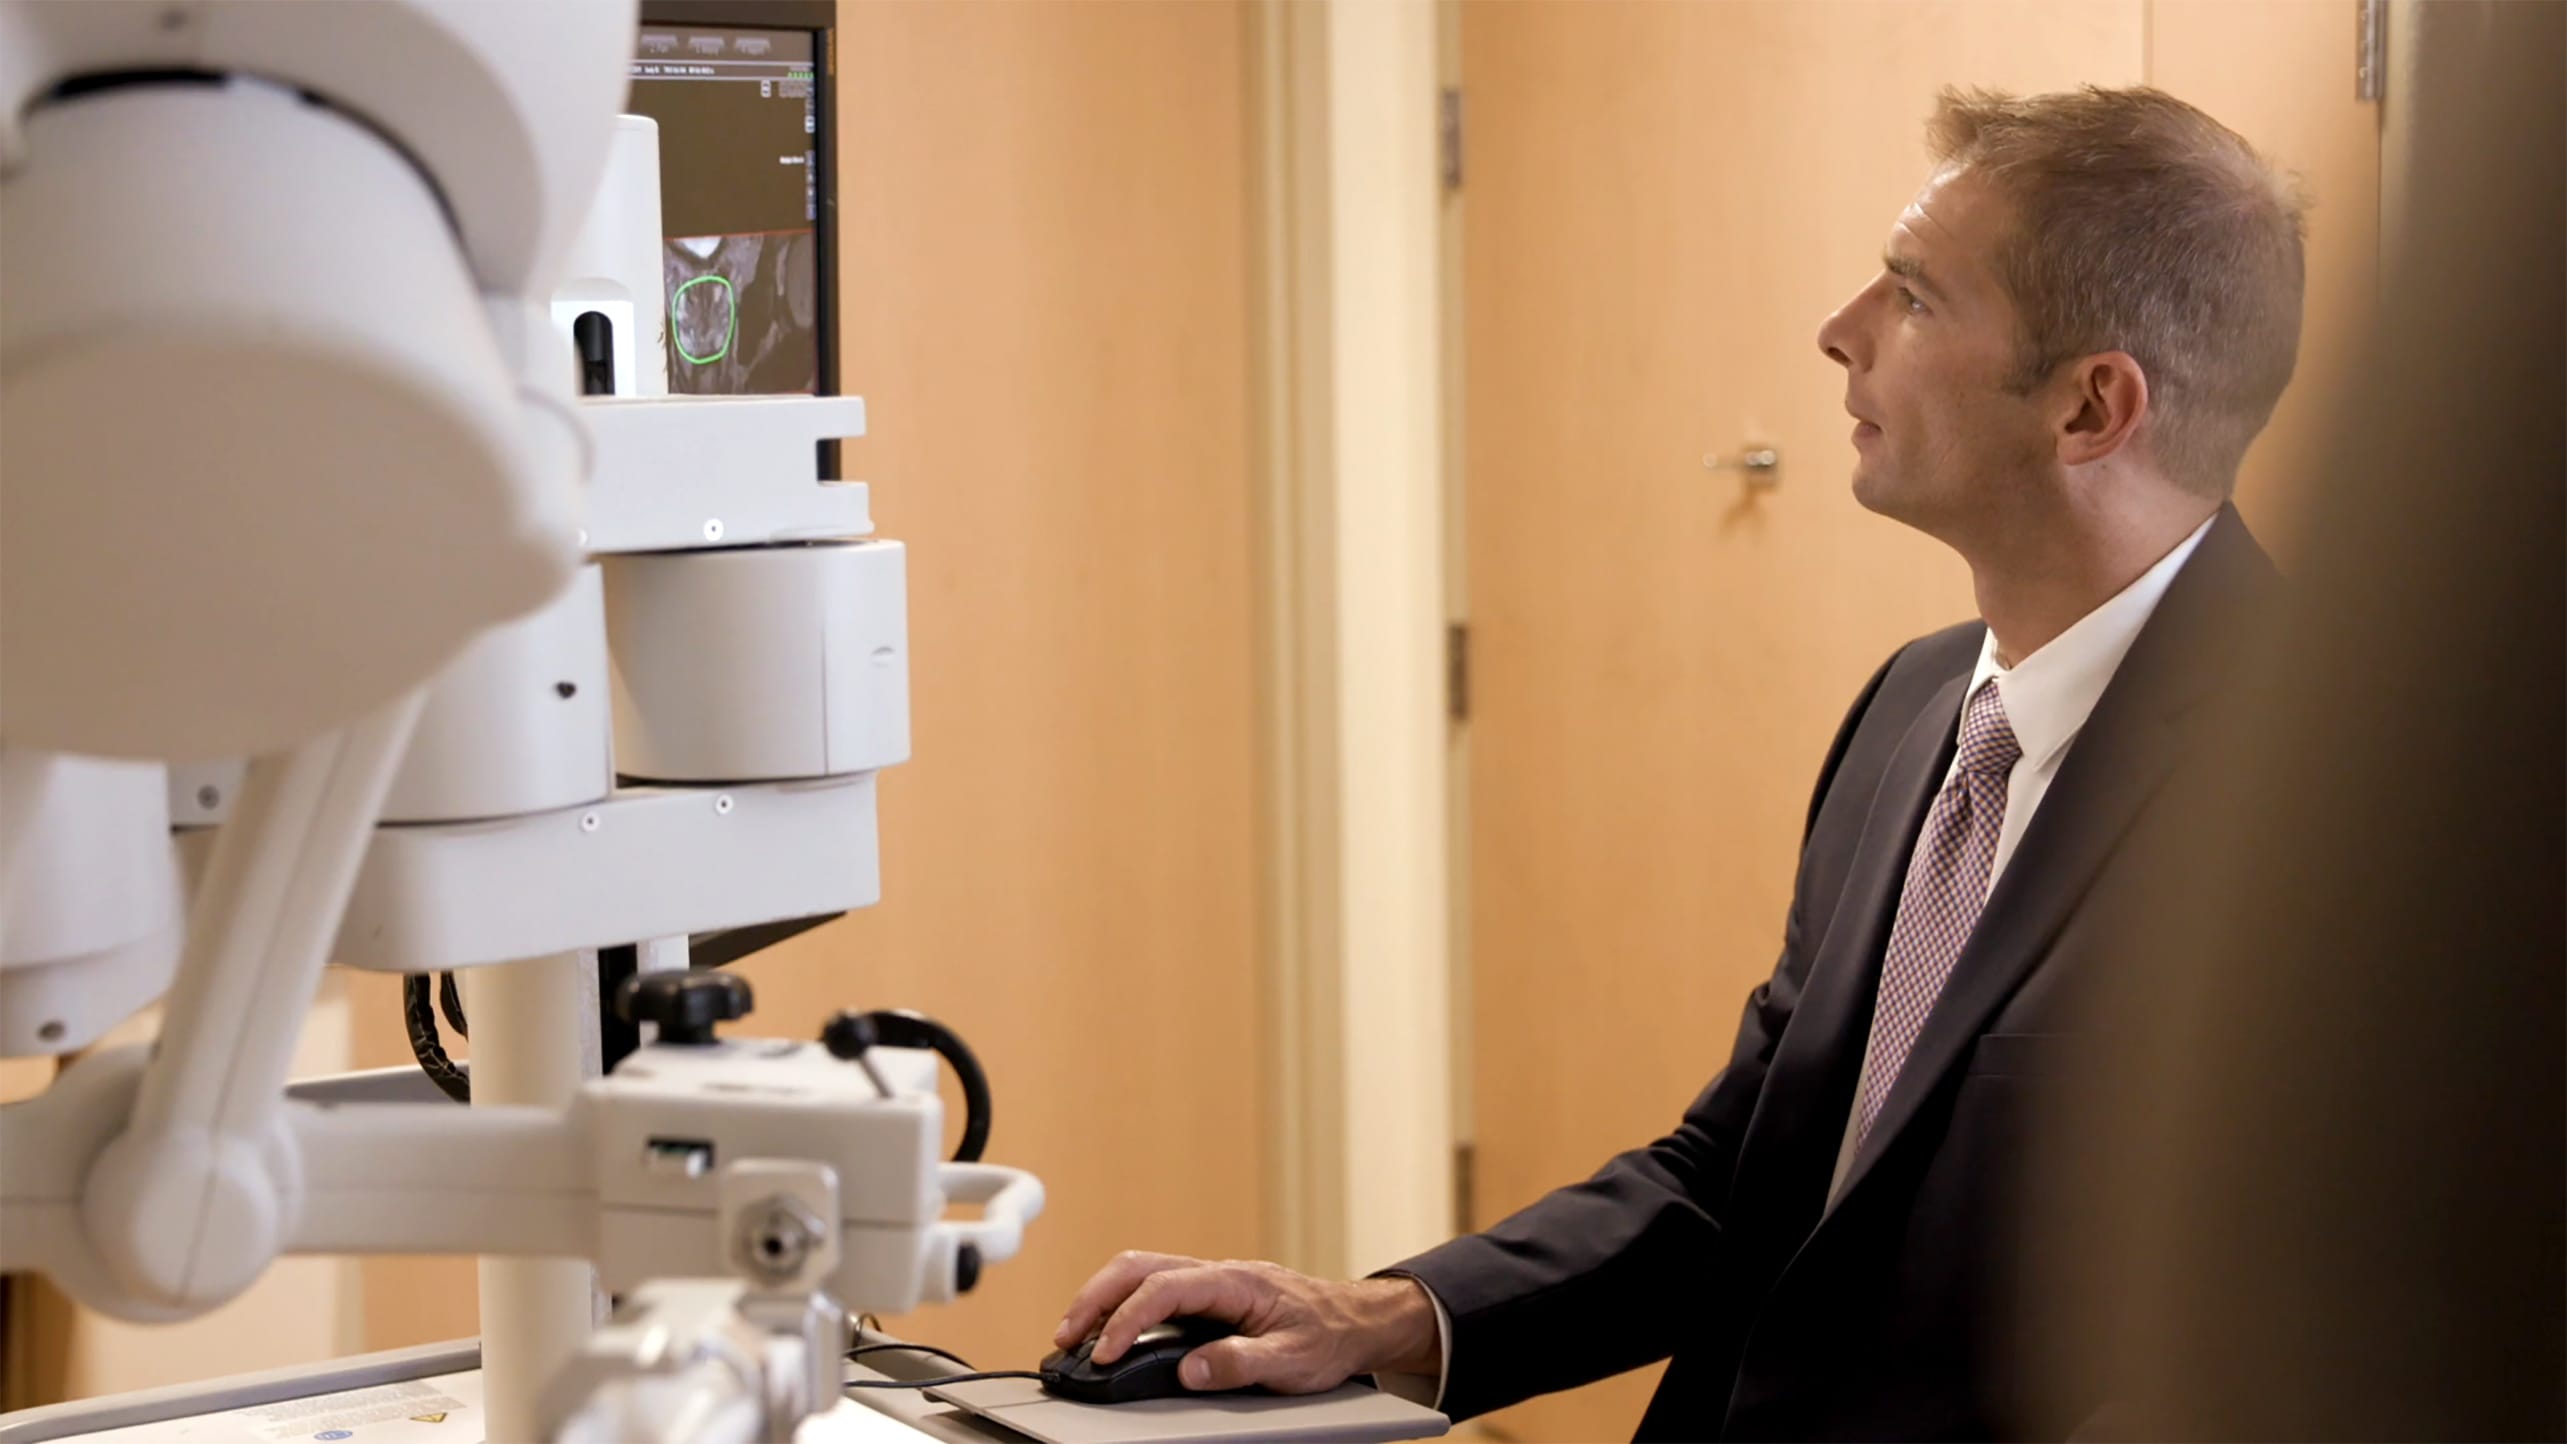 A doctor examines imaging to detect prostate cancer.